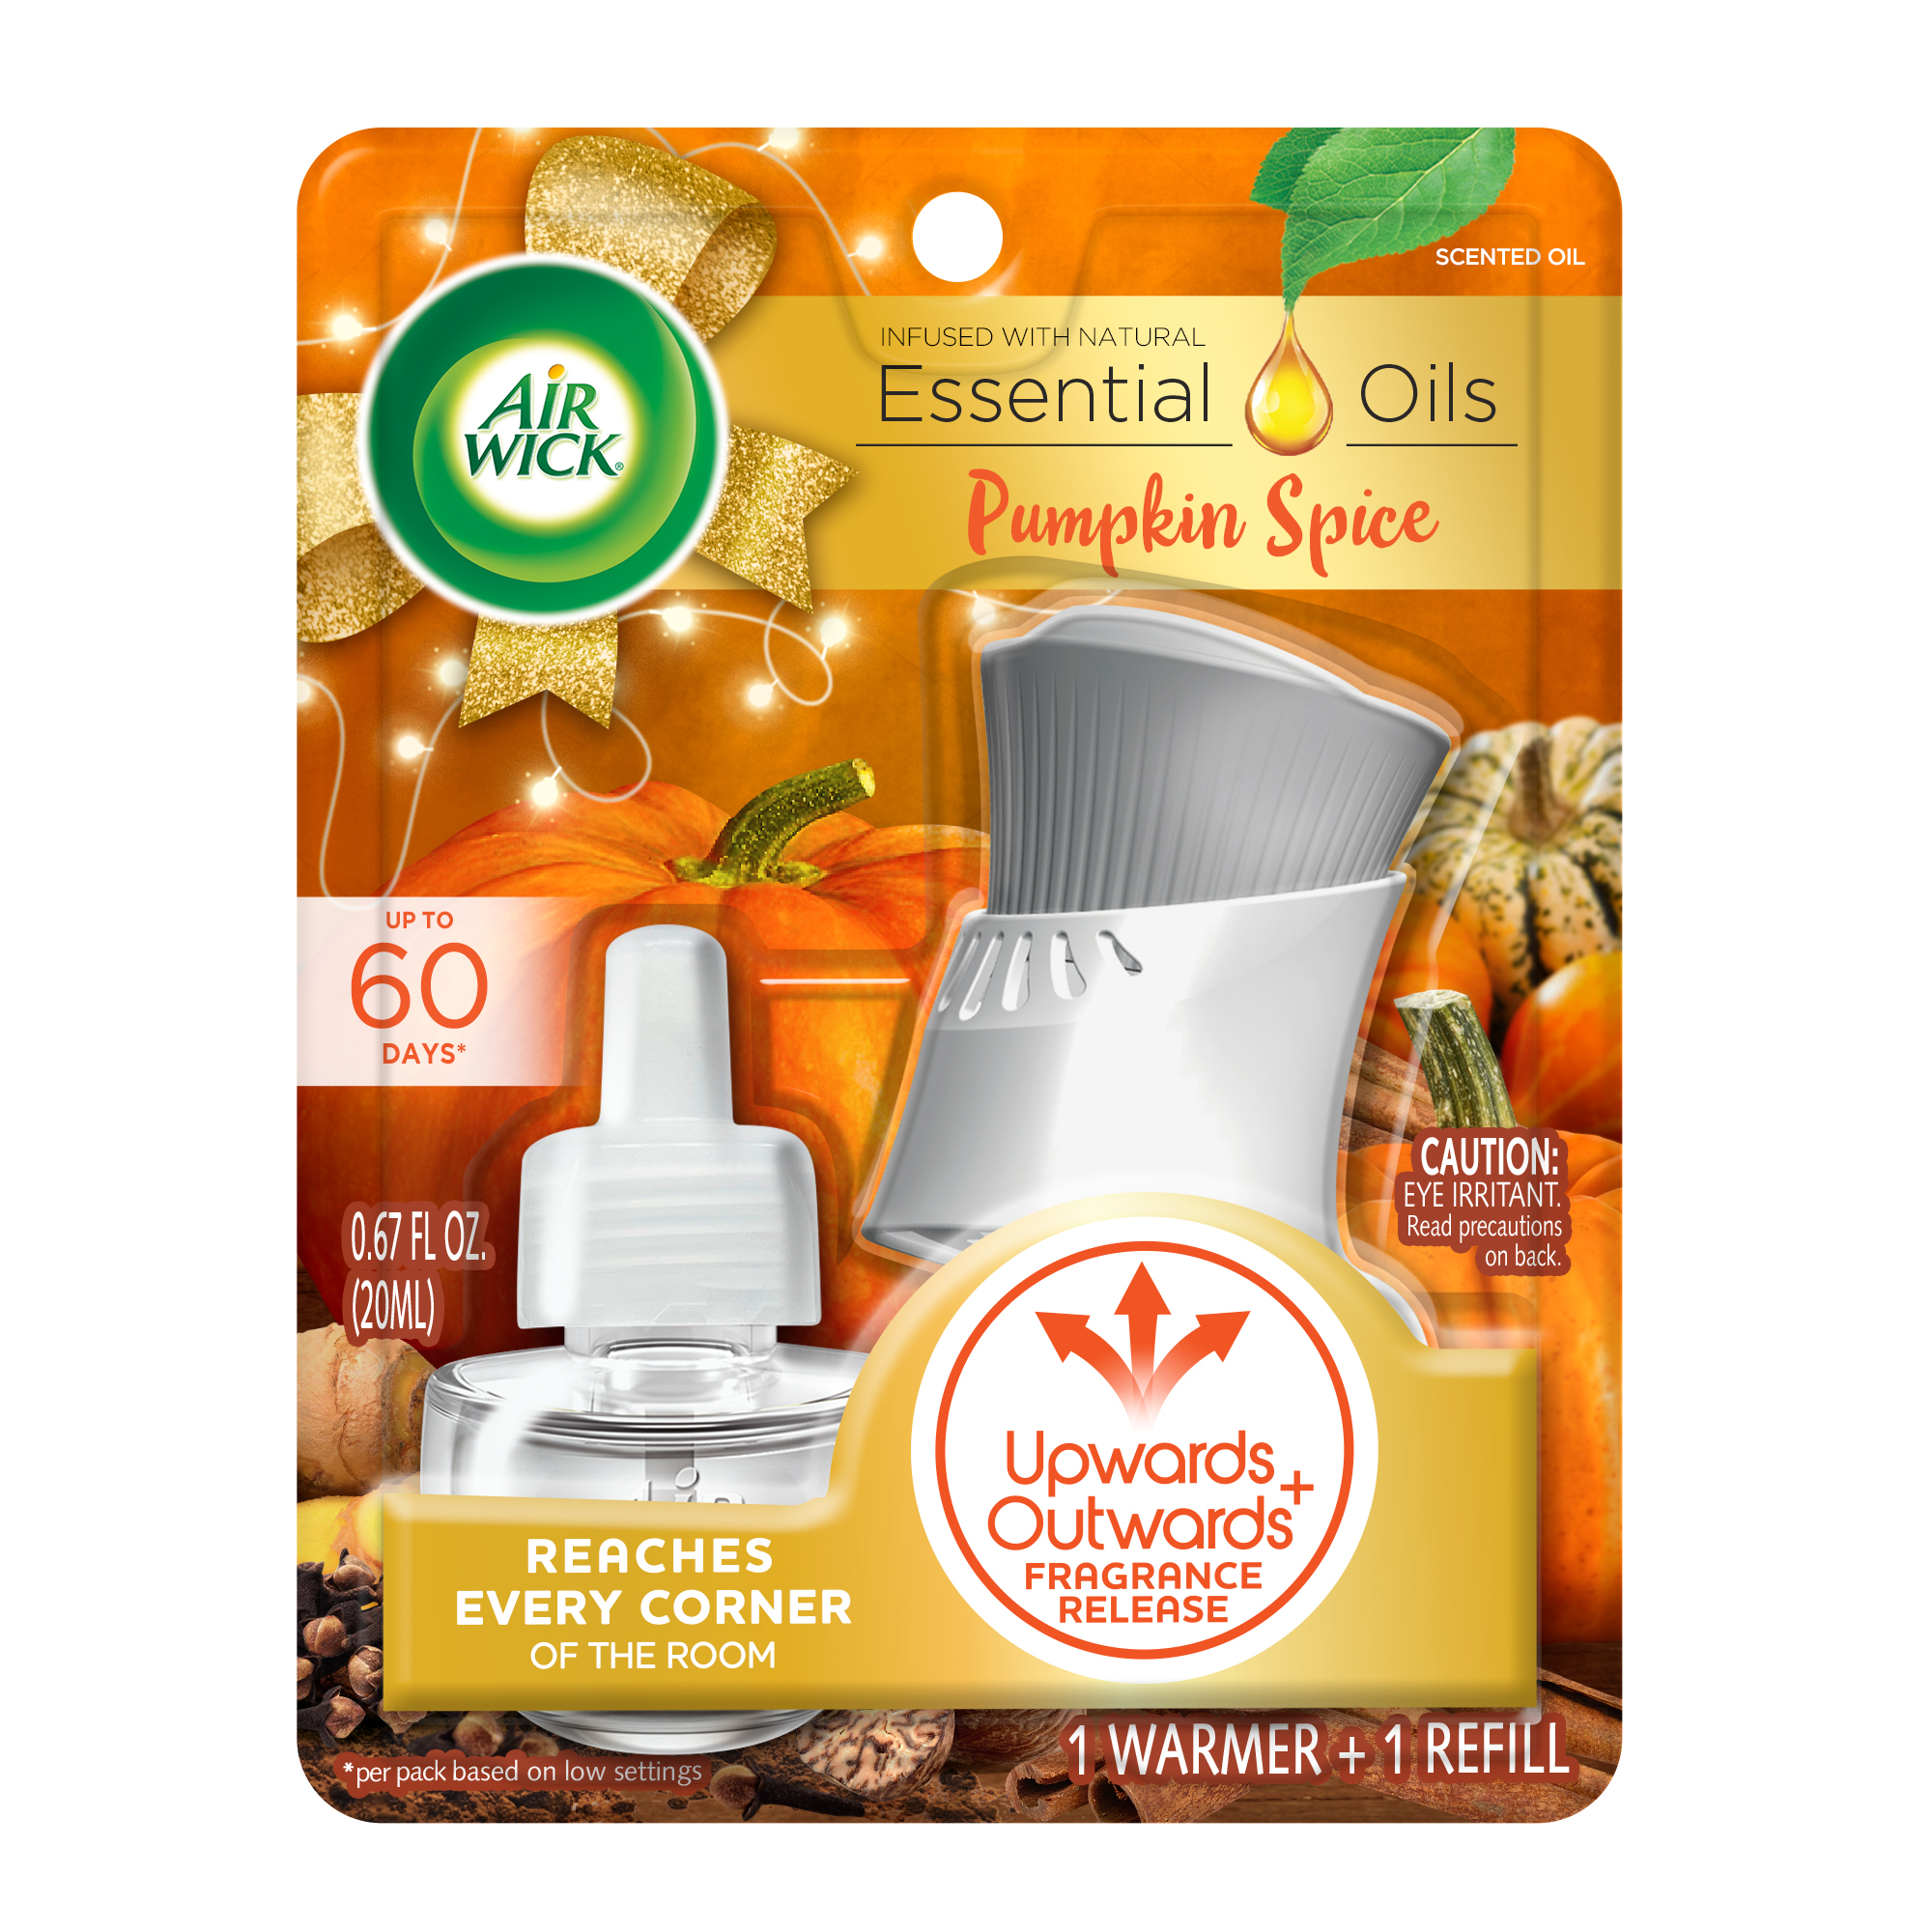 AIR WICK Scented Oil  Pumpkin Spice  Kit